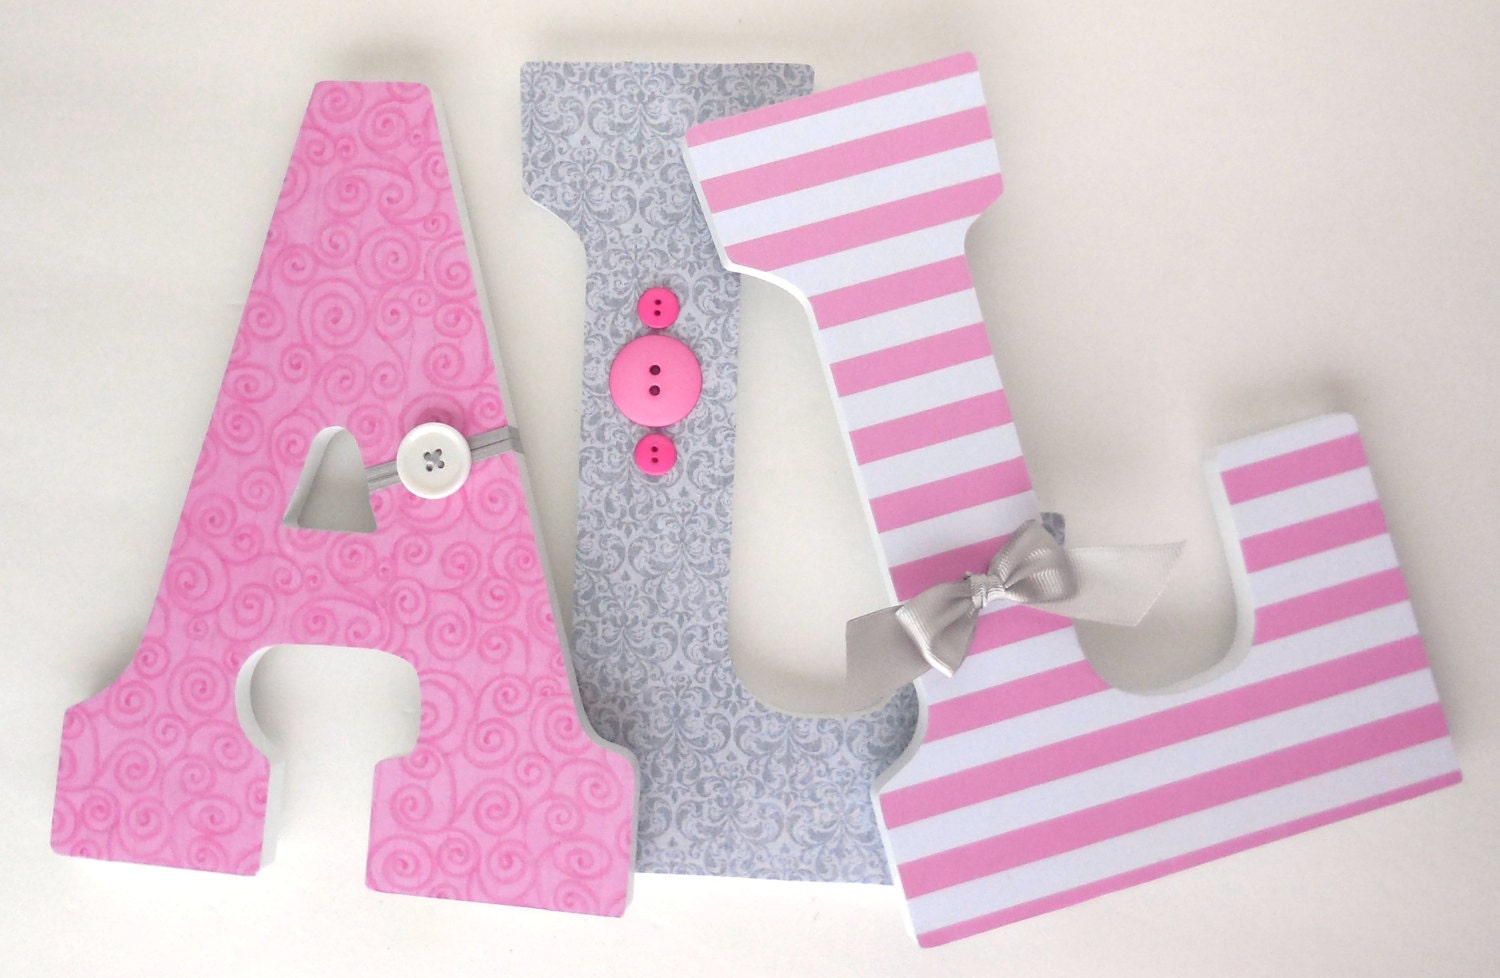 Baby Girl Wooden Letters for Nursery Pink and Light Gray | Etsy